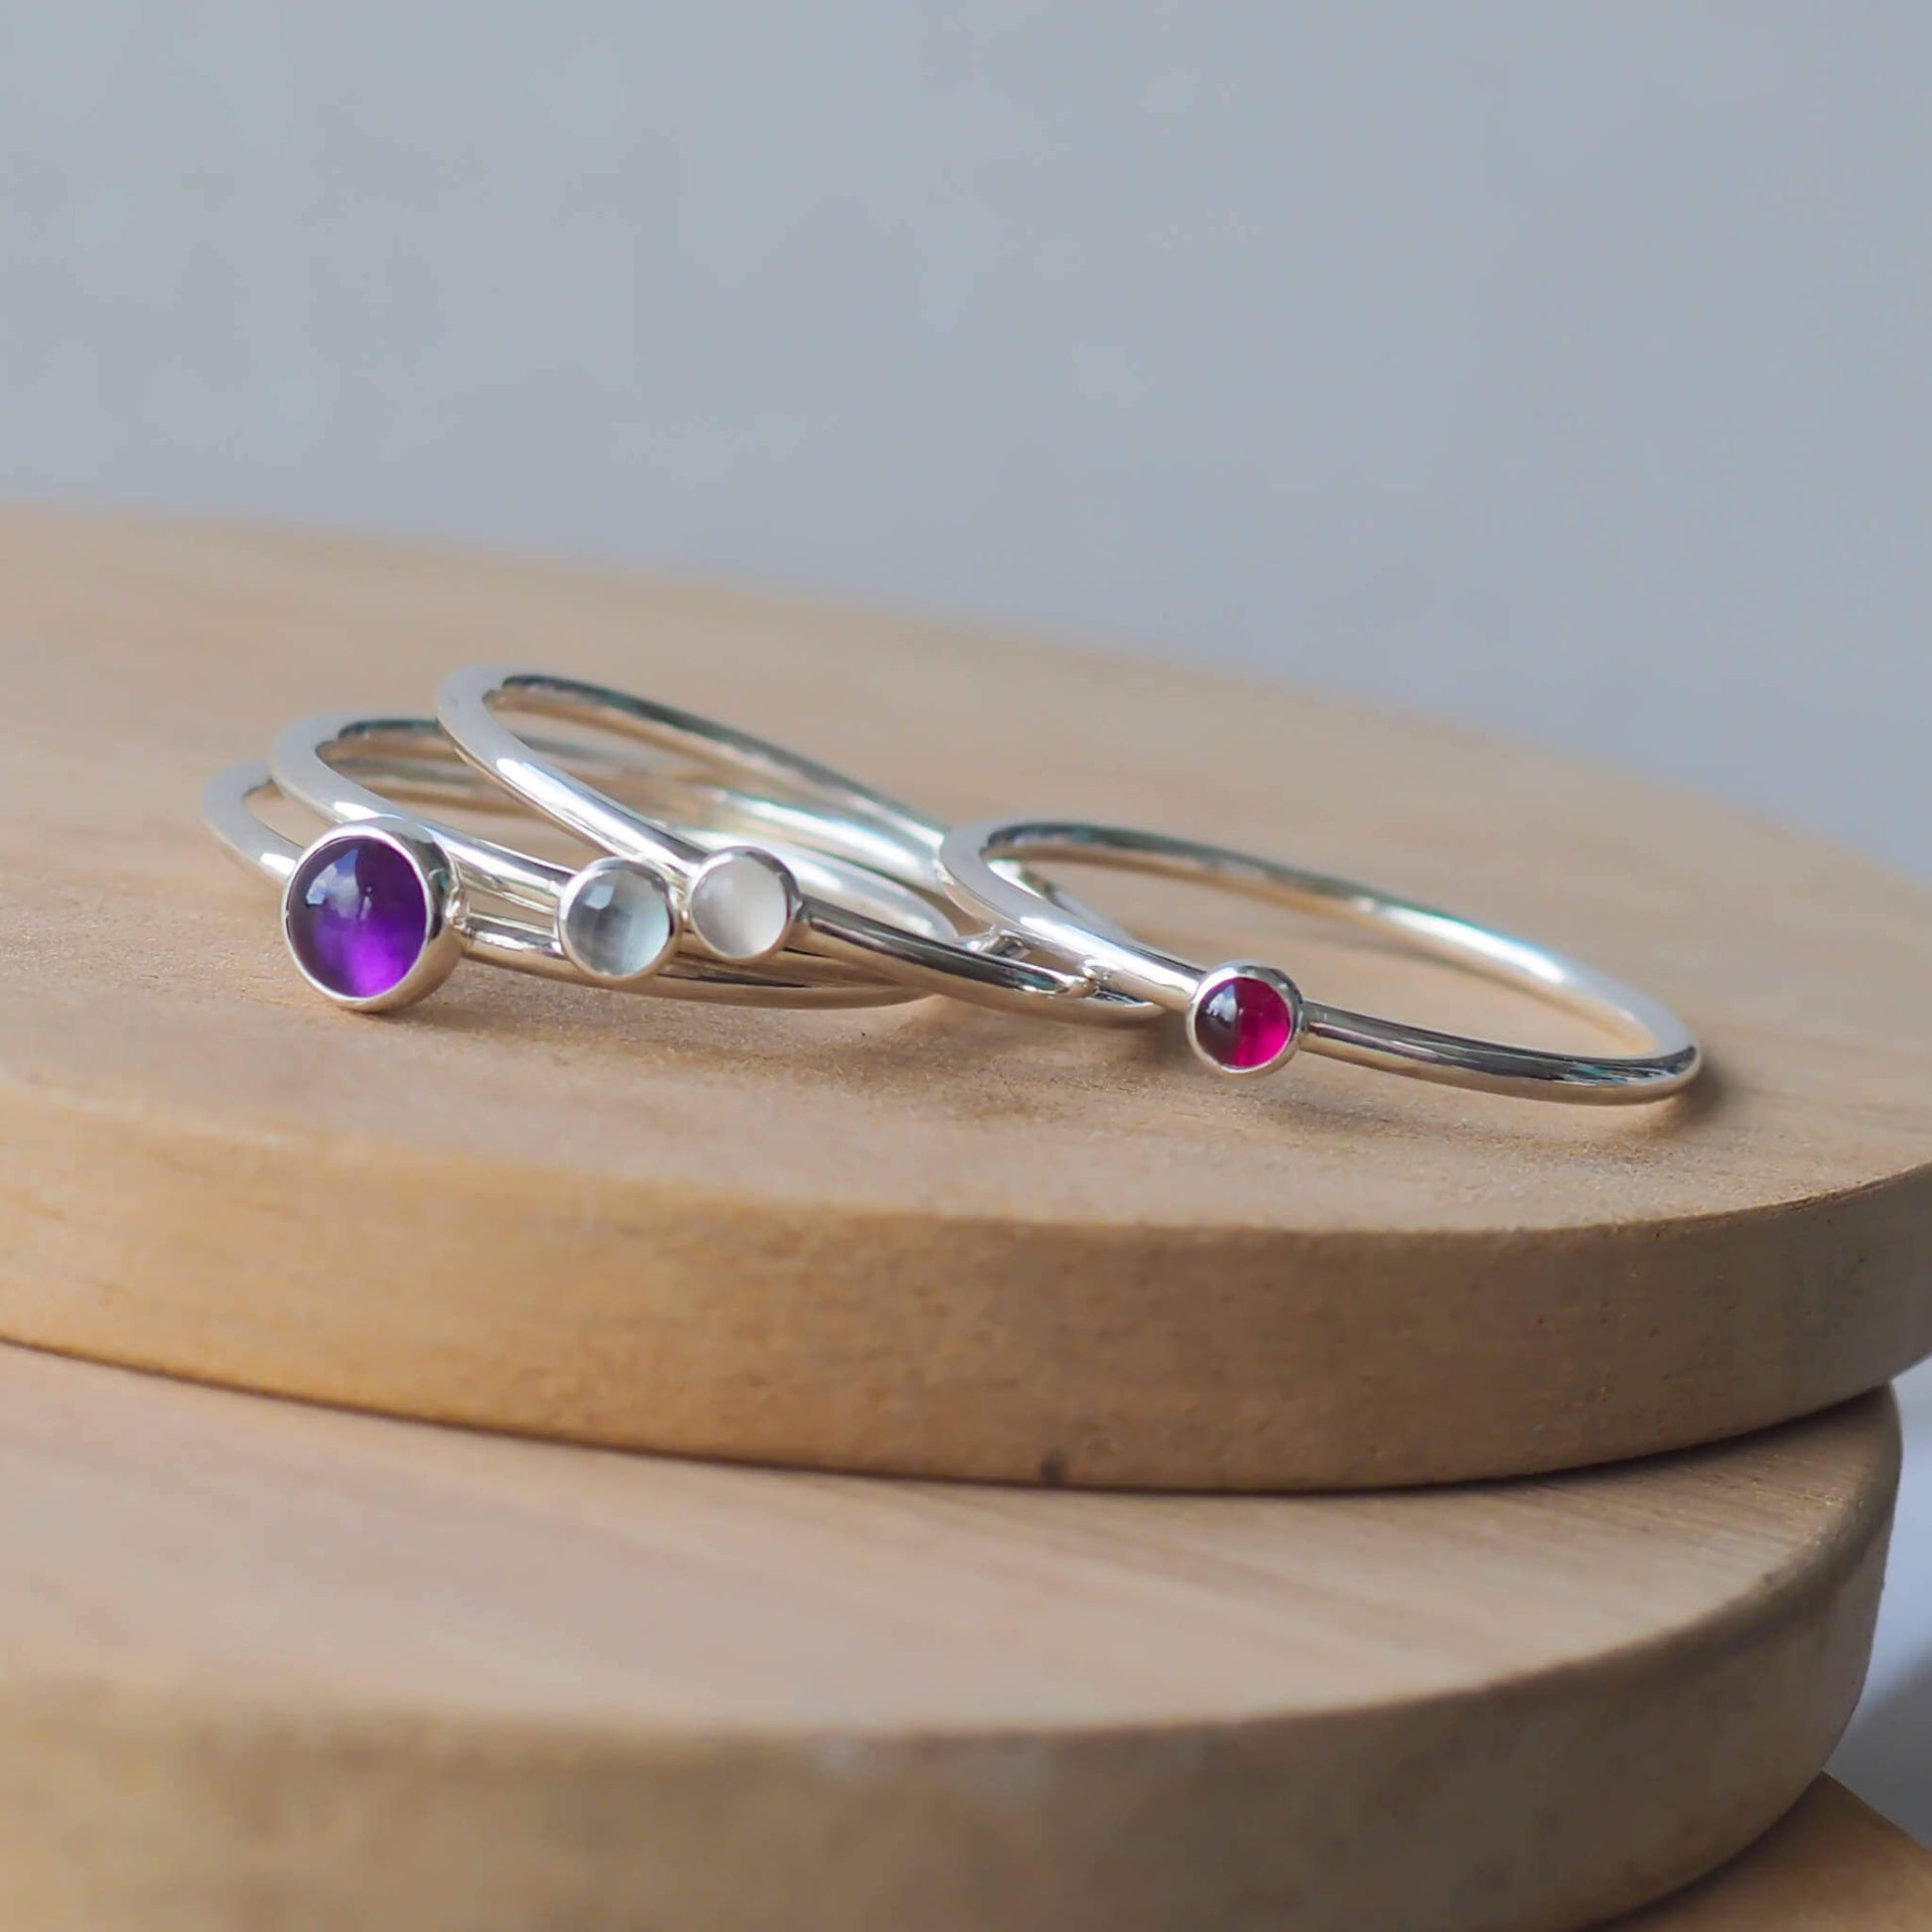 Pile of rings in Sterling Silver and mixed gemstones. The rings are minimalist in style with no decoration and feature a single simple round cabochon in a large 5mm Purple Amethyst, smaller 3mm Blue Topaz, White Moonstone, and rich red Garnet. Handmade in Scotland by maram jewellery